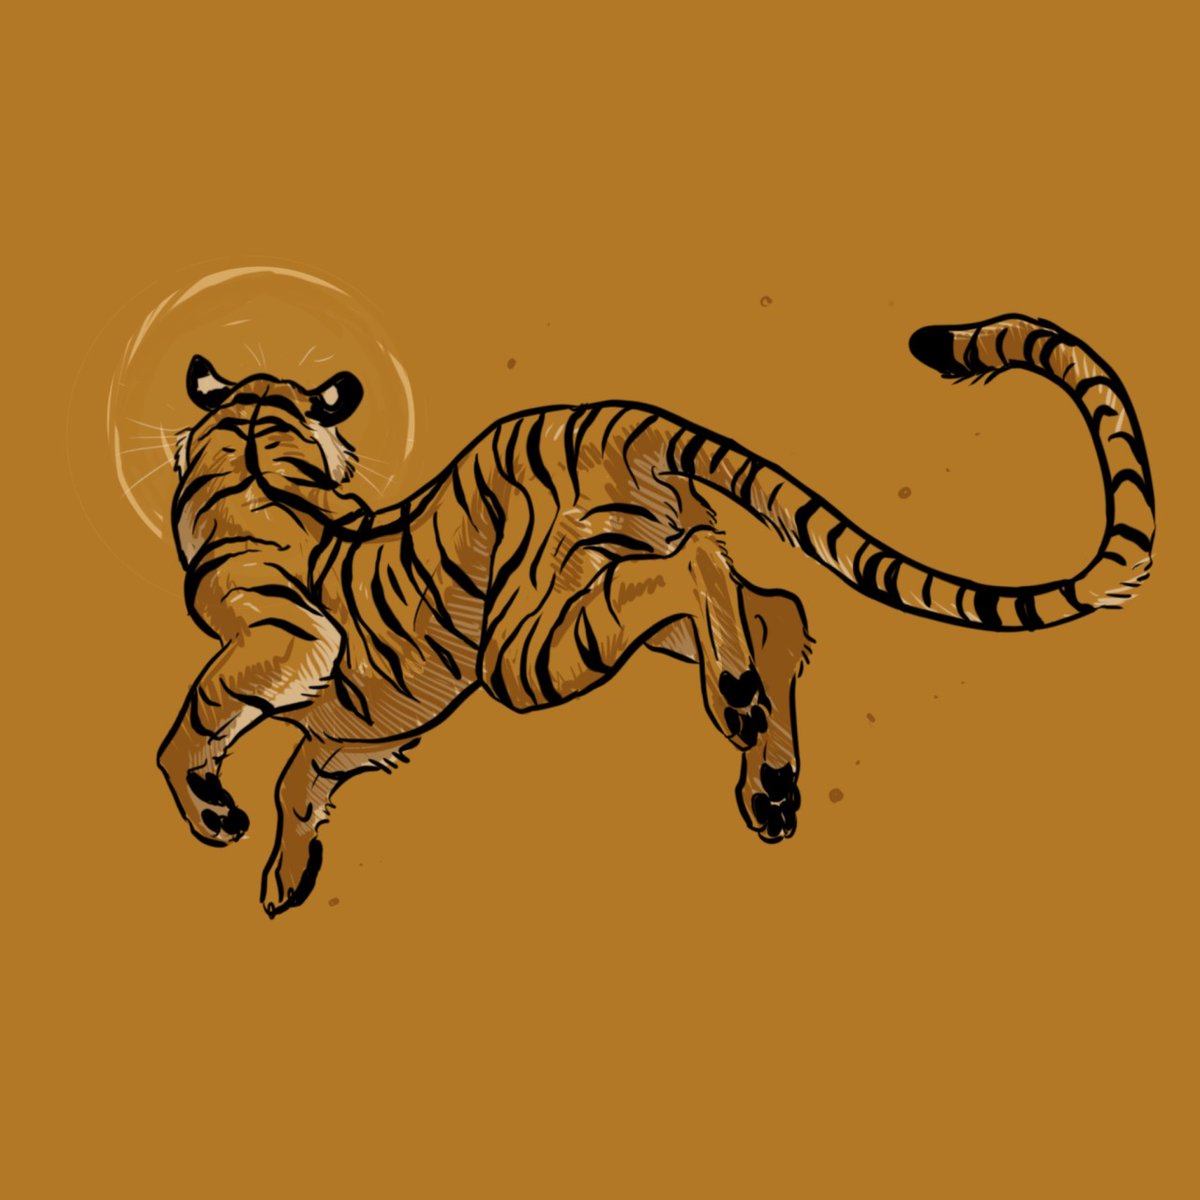 Some olde art for #WorldTigerDay